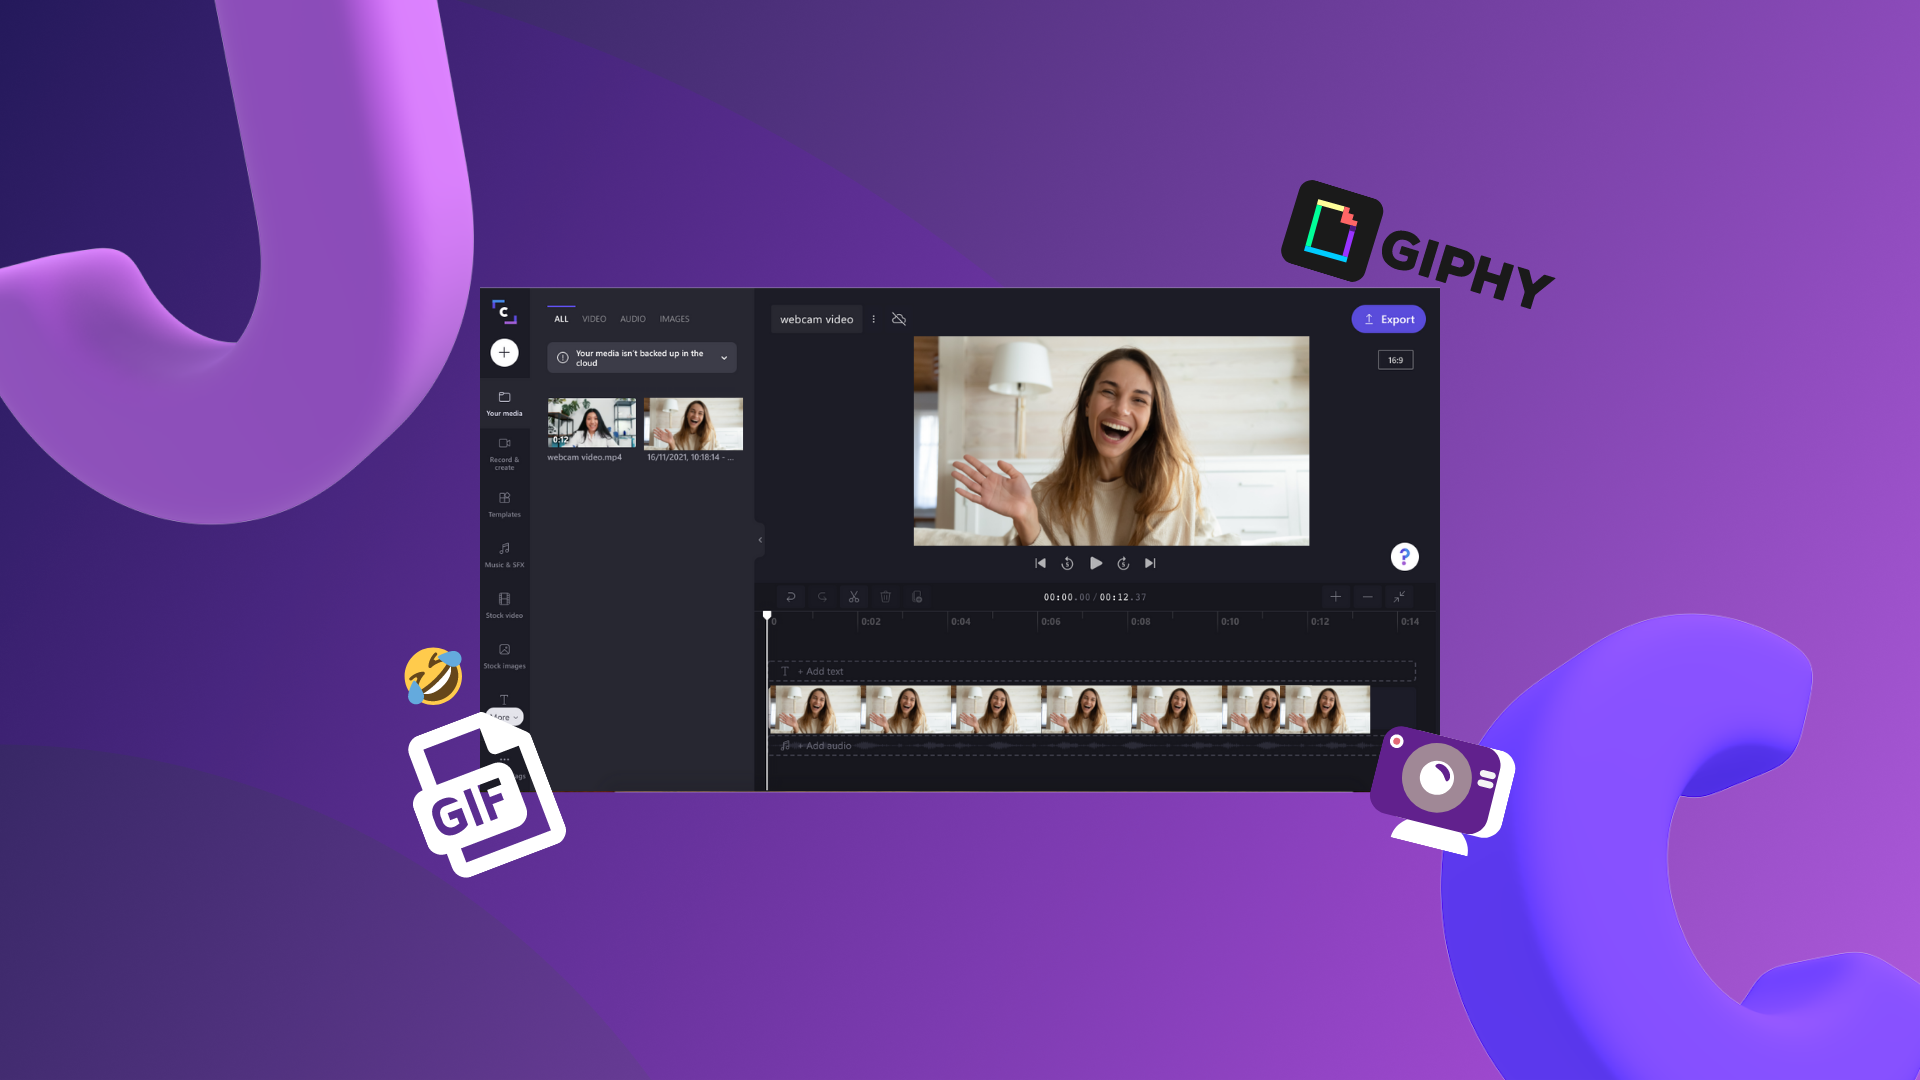 How to make a gif? – GIF IT UP